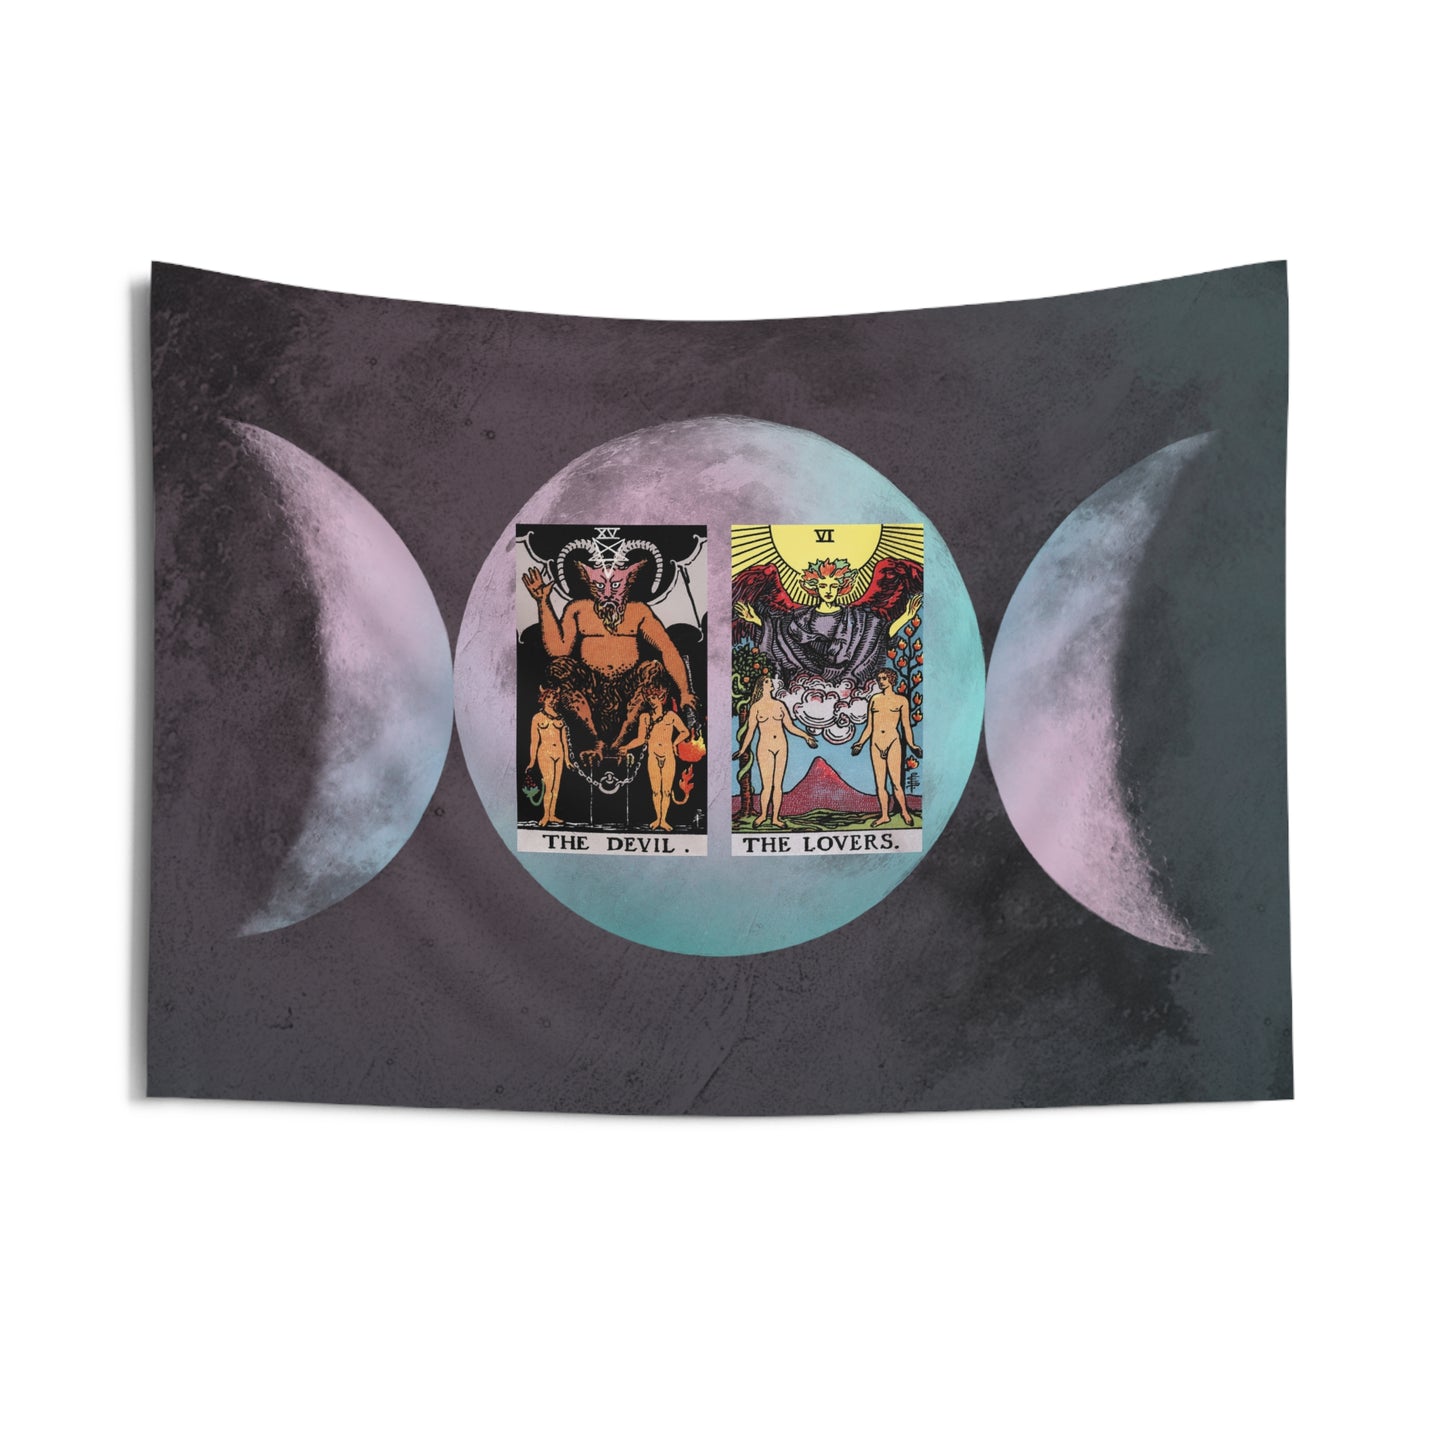 The Devil AND The Lovers Tarot Cards Altar Cloth or Tapestry with Triple Goddess Symbol